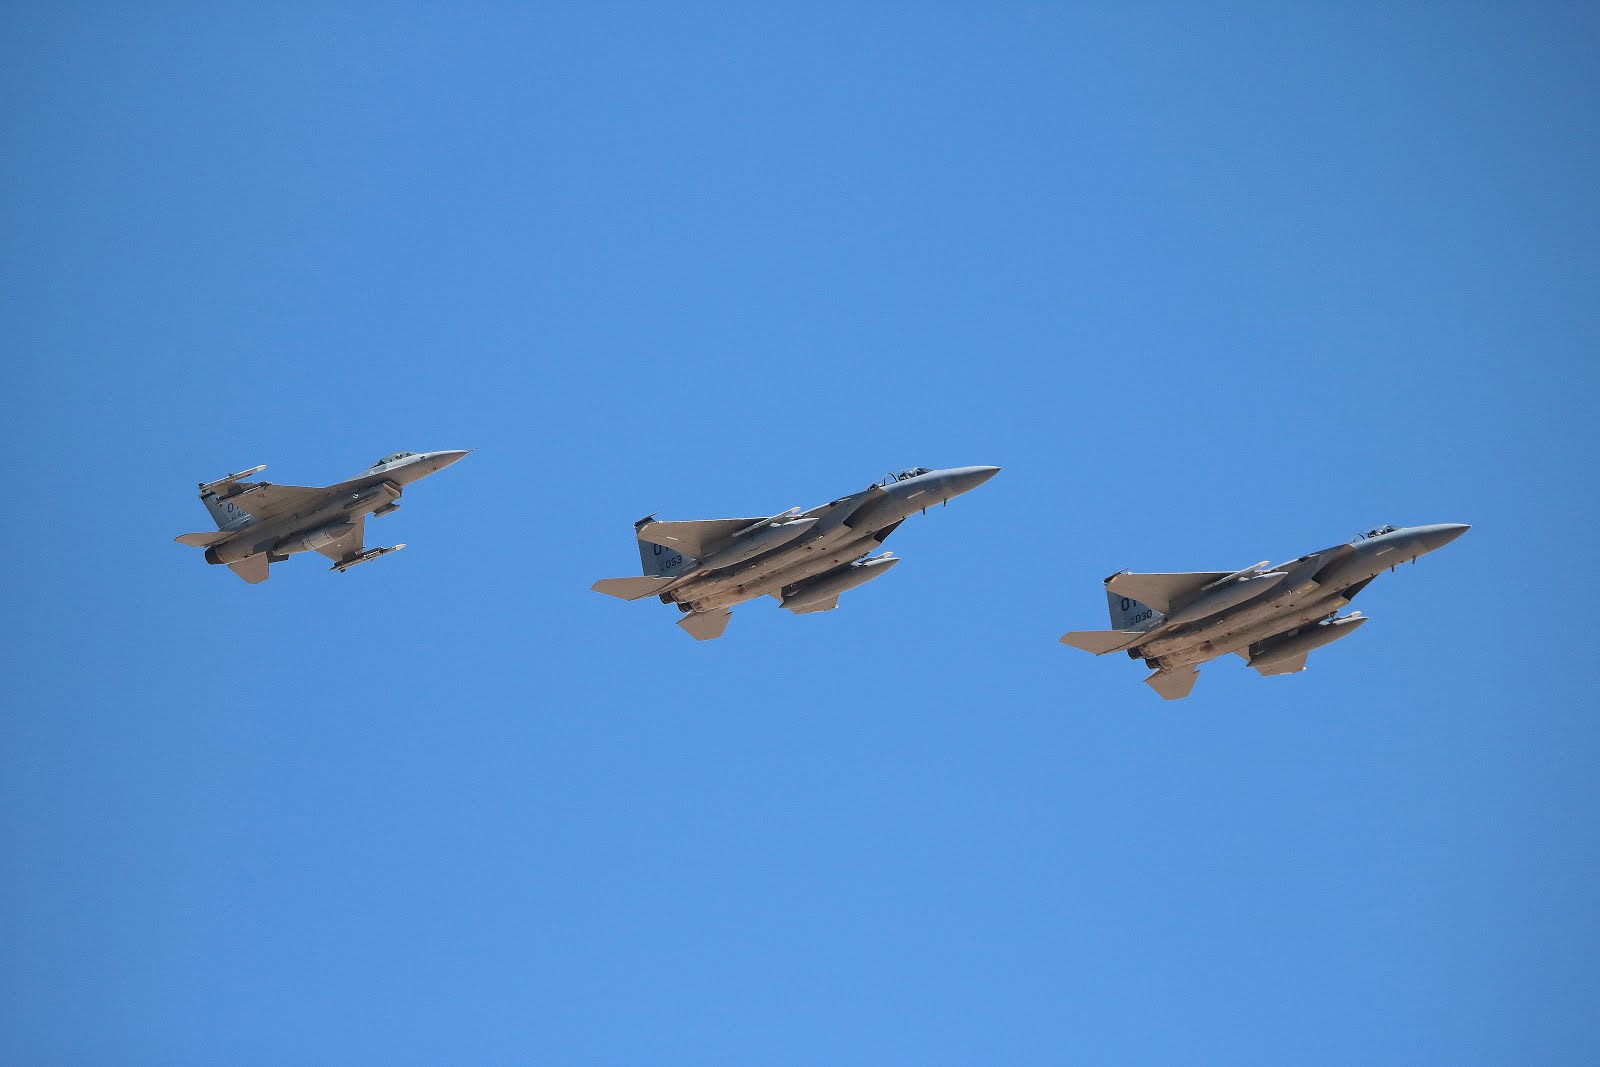 Nellis AFB 29th May 2018